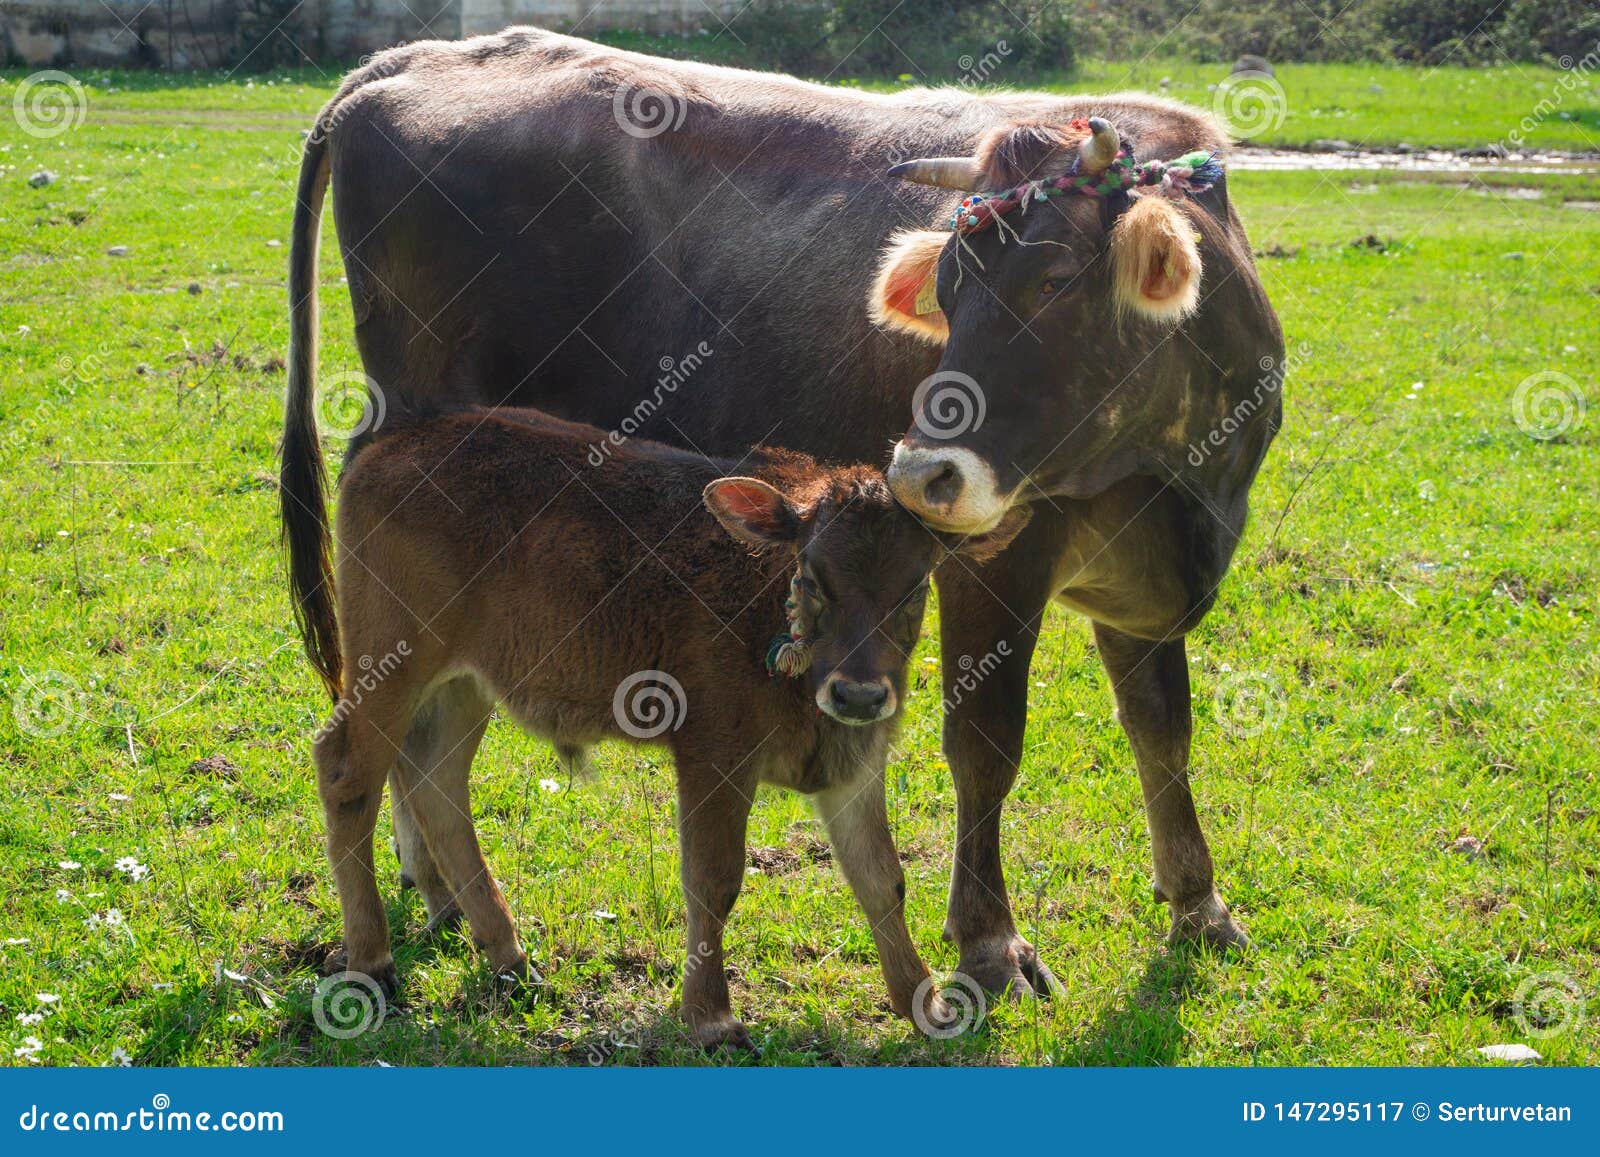 baby cow and mother cow looking to camera. marmaris turkey. praire background. ornate brown cows. sunlights